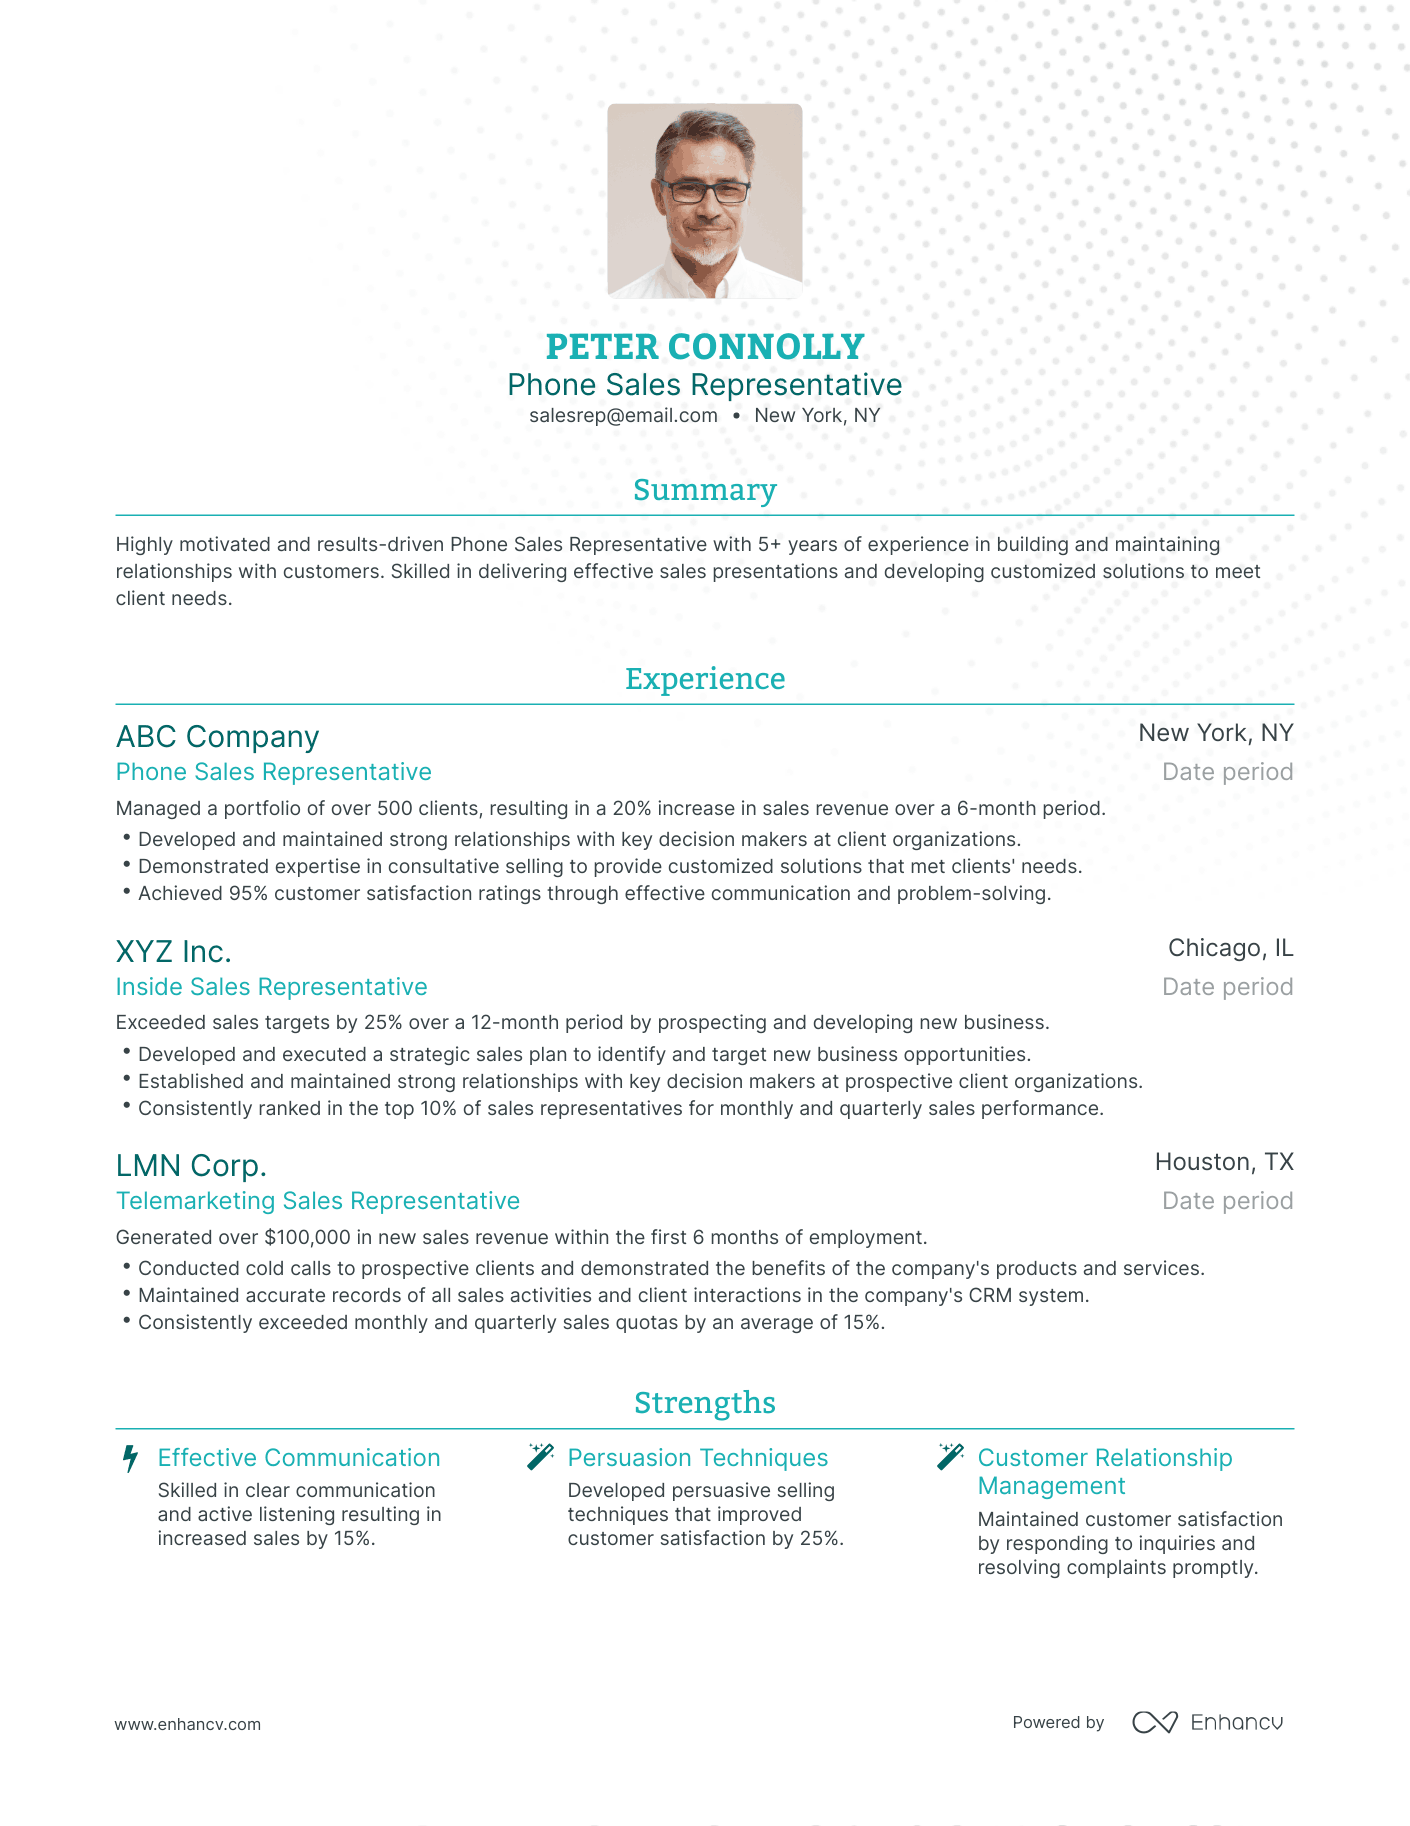 Traditional Phone Sales Resume Template